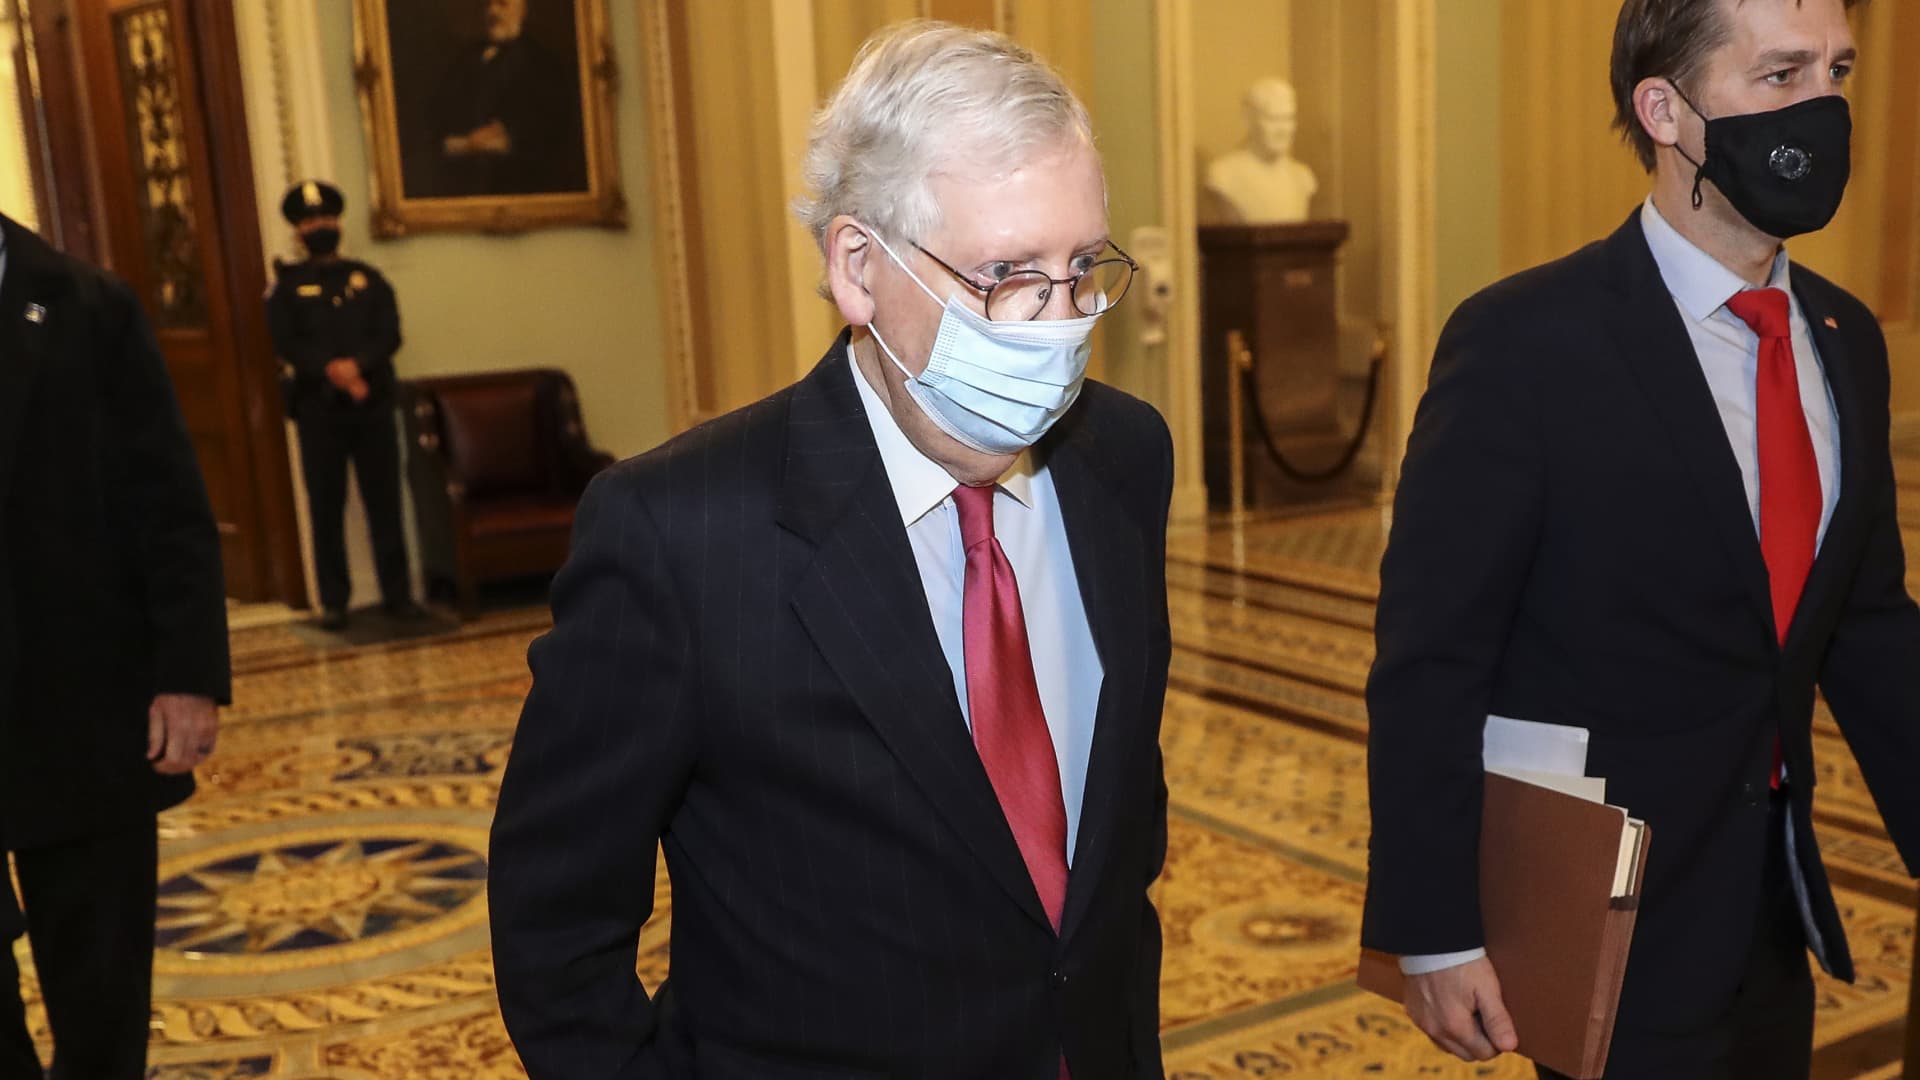 Senate Majority Leader Mitch McConnell, a Republican from Kentucky, wears a protective mask while walking to his office at the U.S. Capitol in Washington, D.C., U.S., on Monday, Dec. 21, 2020.